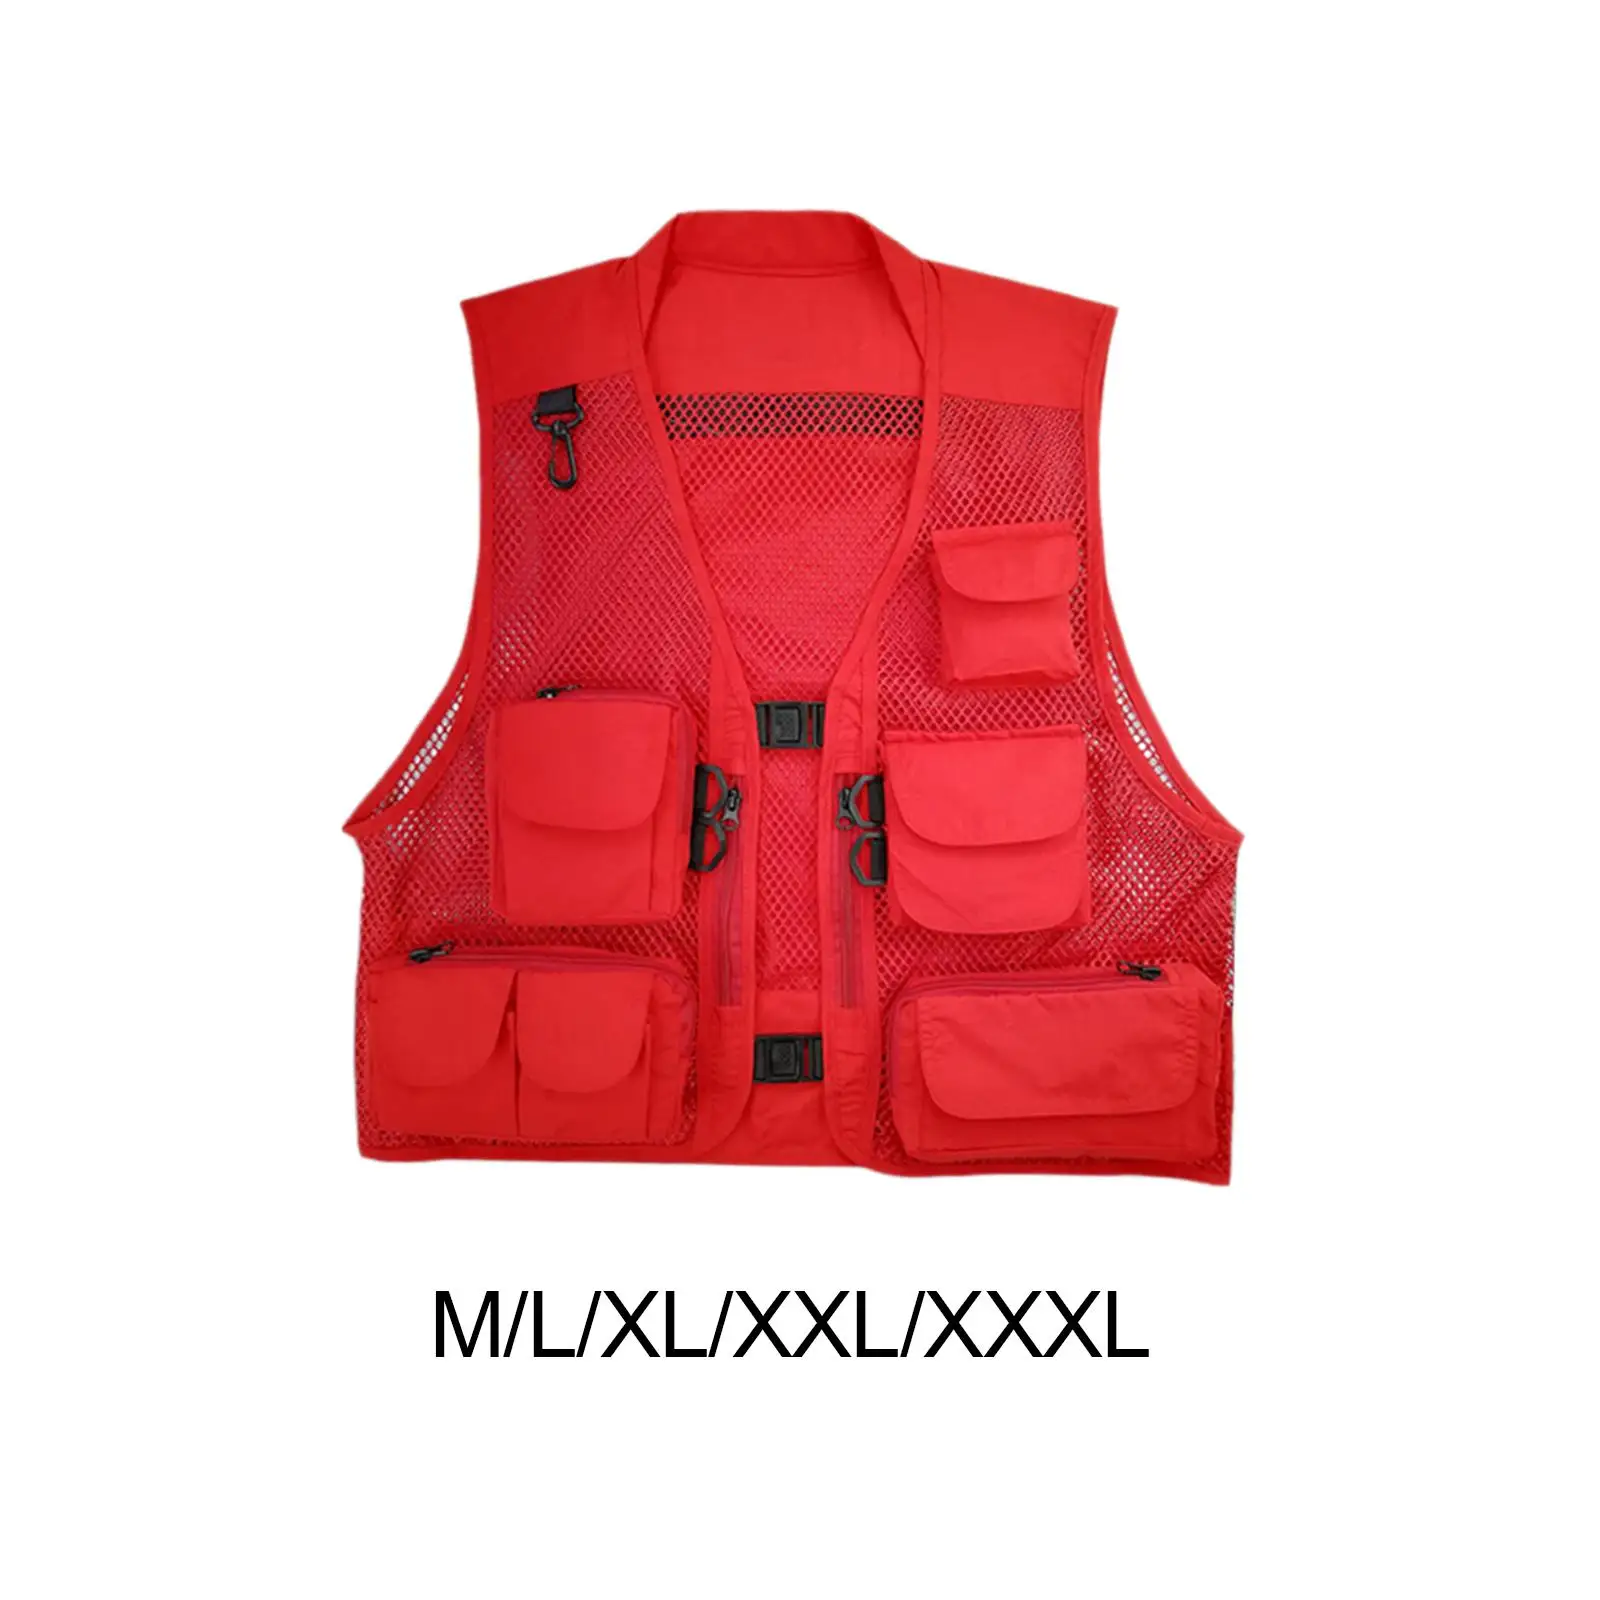 Men Mesh Camping Fishing Vest Multiple Pockets Red Breathable Material